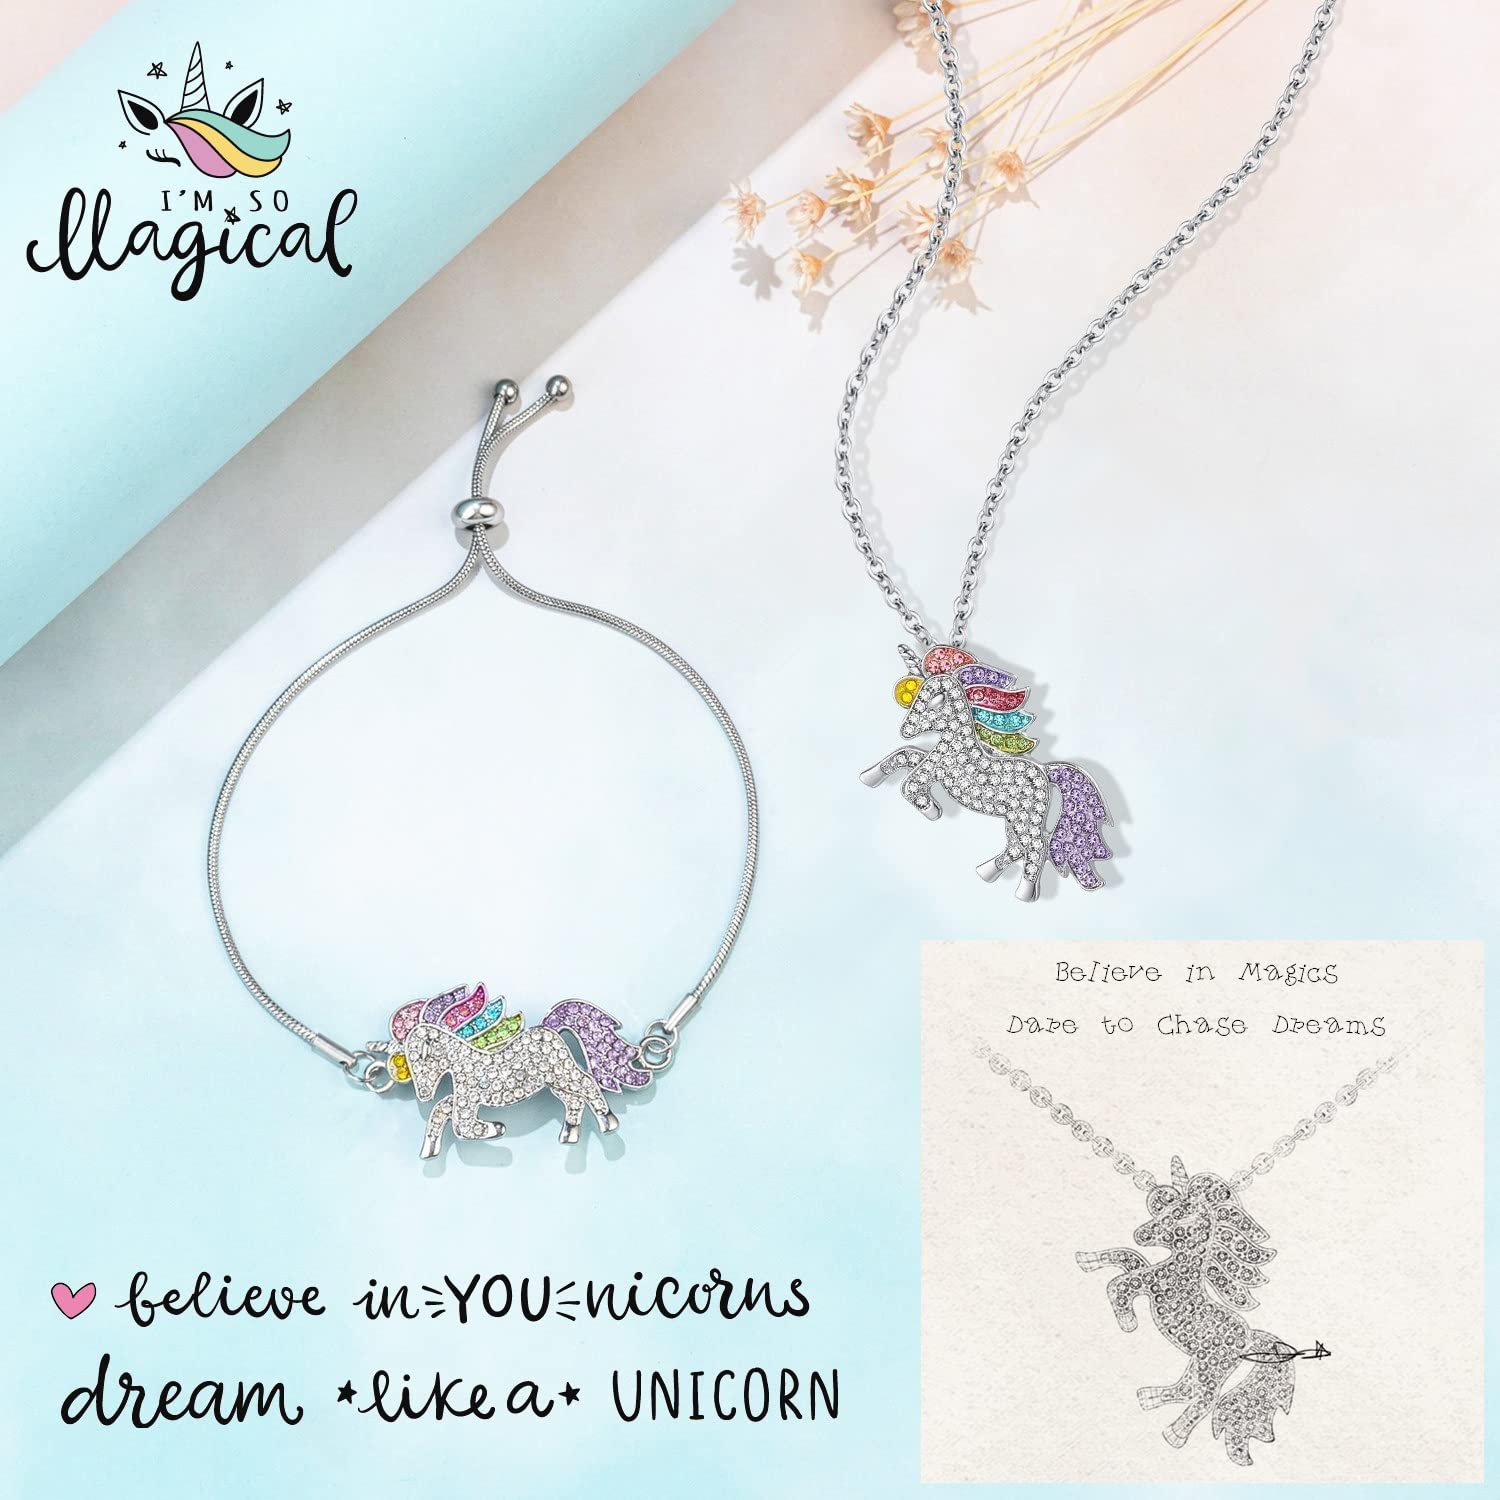 SHWIN Unicorns Gifts for Girls Kids Jewelry 2 or 4 Pack Unicorn Necklace Bracelet Earrings Ring Jewelry Set Birthday Gifts for Girls Daughter Granddaughter Niece